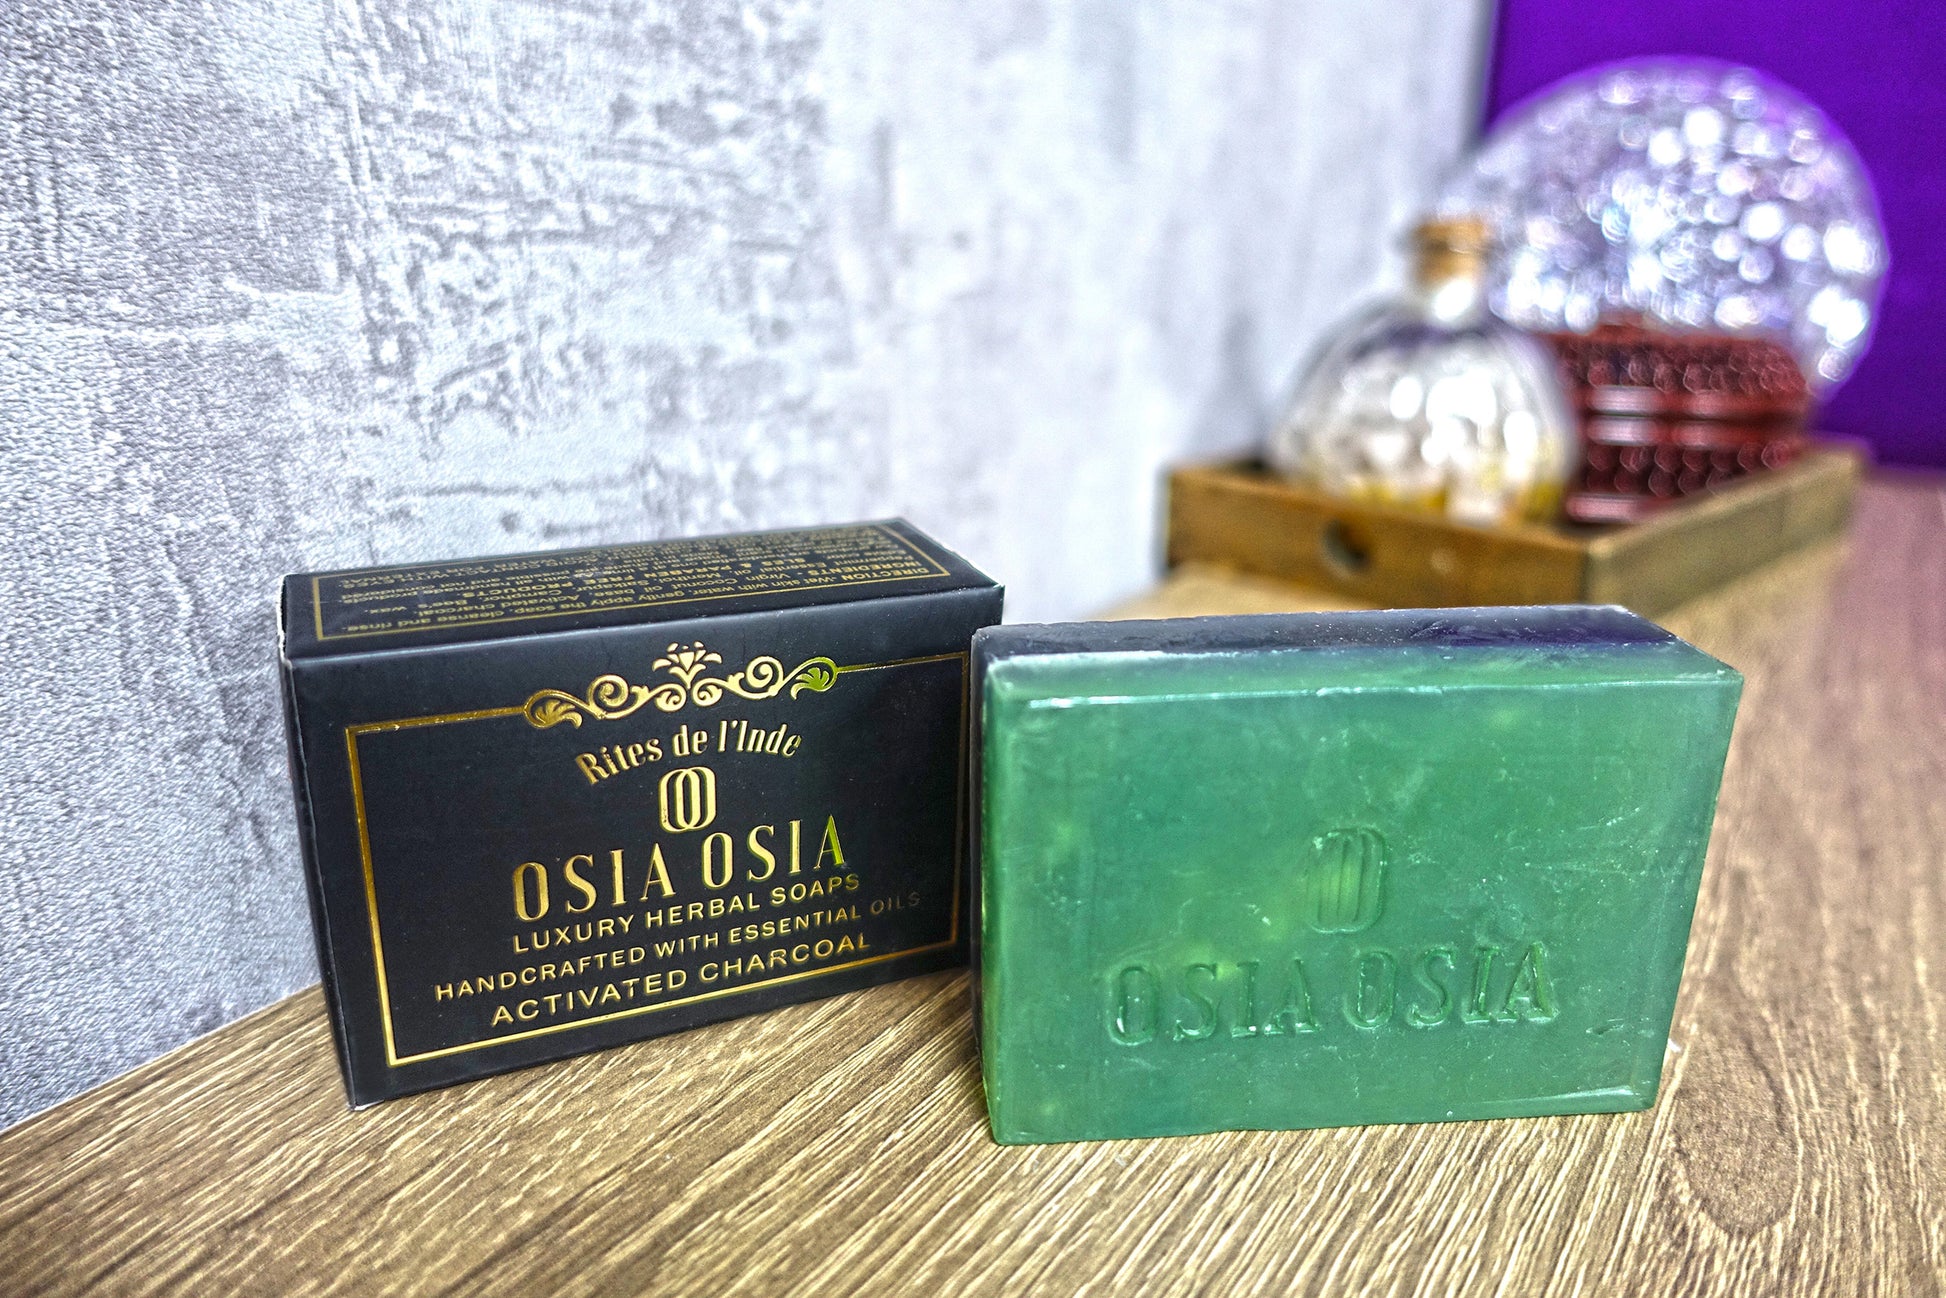 ctivated Charcoal with Peppermint Oil Handcrafted Luxury Herbal Soap 活性炭薄荷精油手工芳療皂